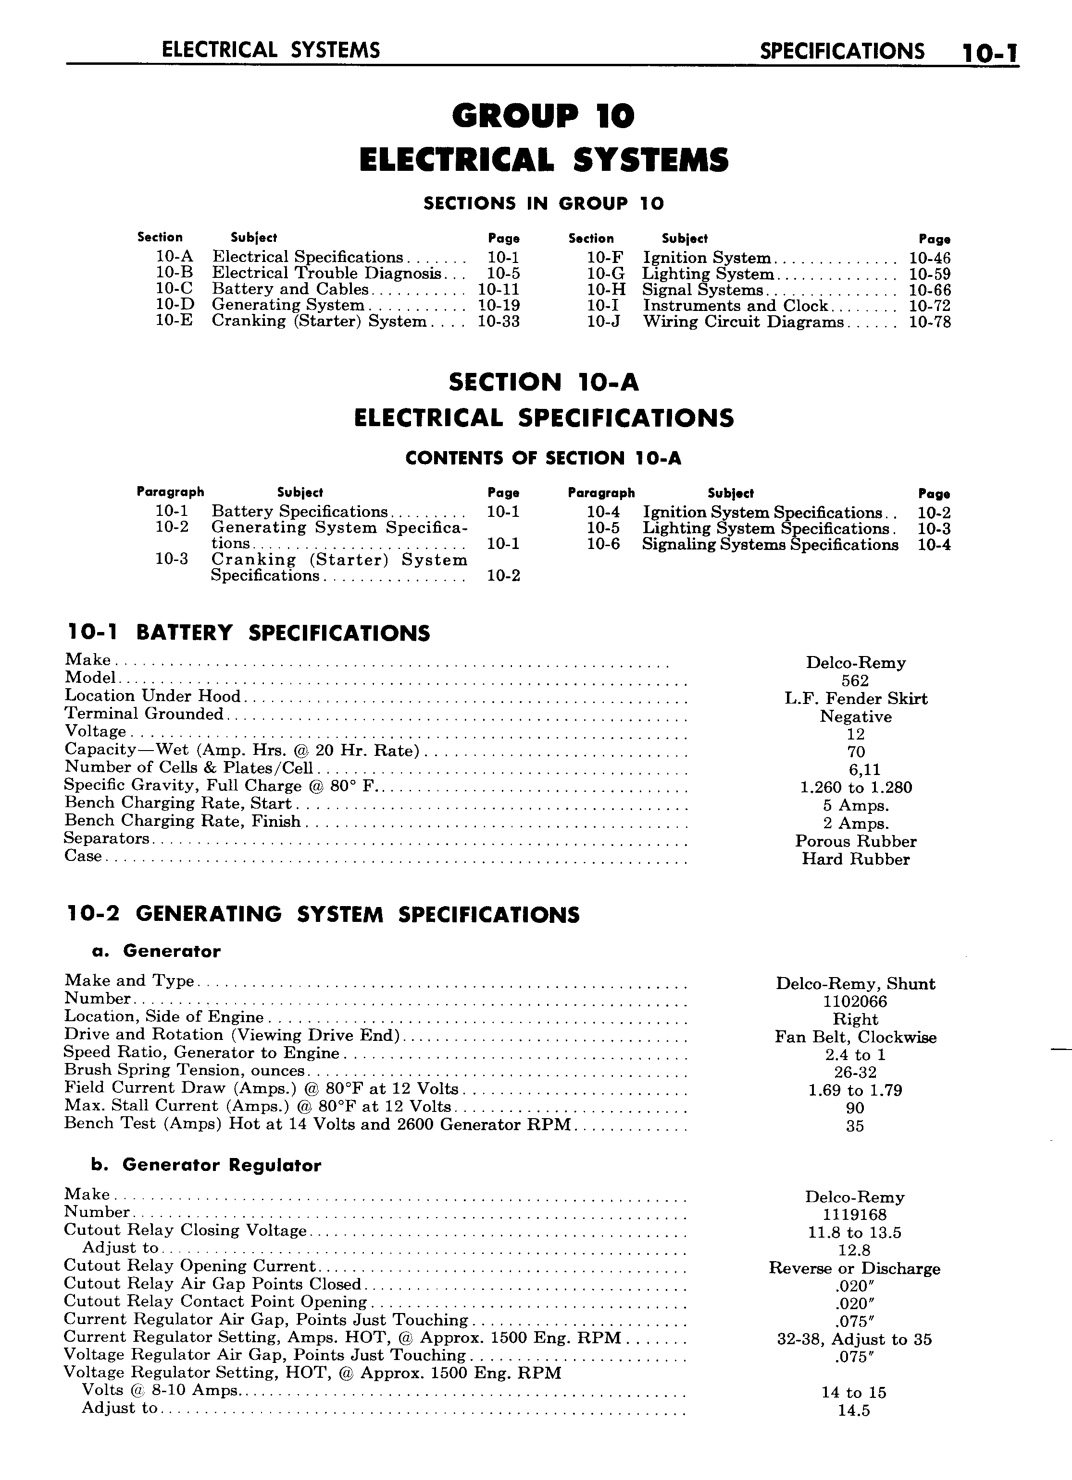 n_11 1957 Buick Shop Manual - Electrical Systems-001-001.jpg